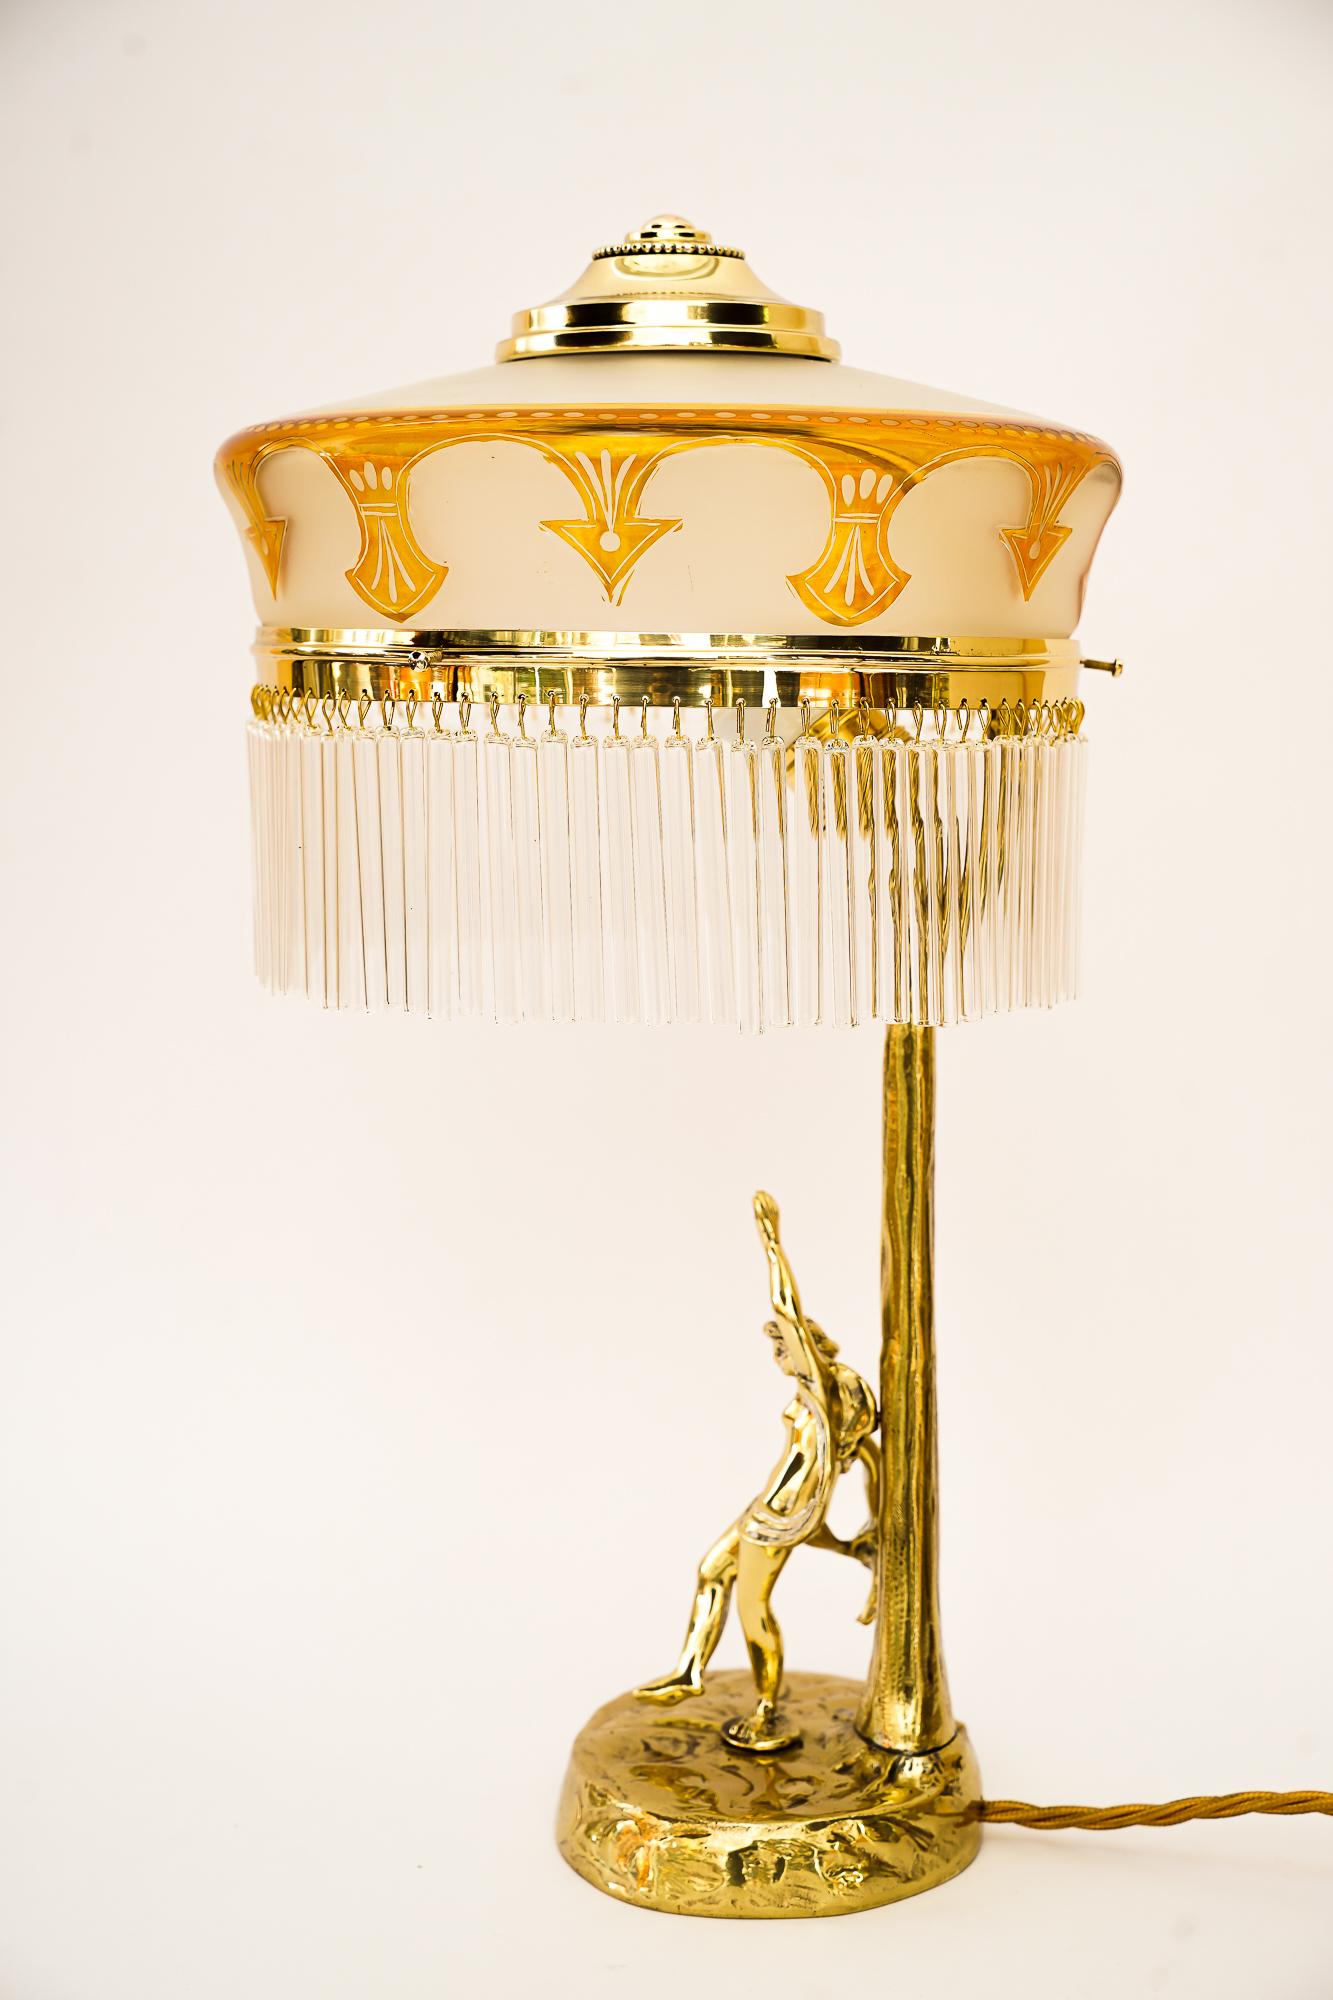 Lacquered Jugendstil Table Lamp with Original Antique Glass Shade, Vienna, Around 1910s For Sale